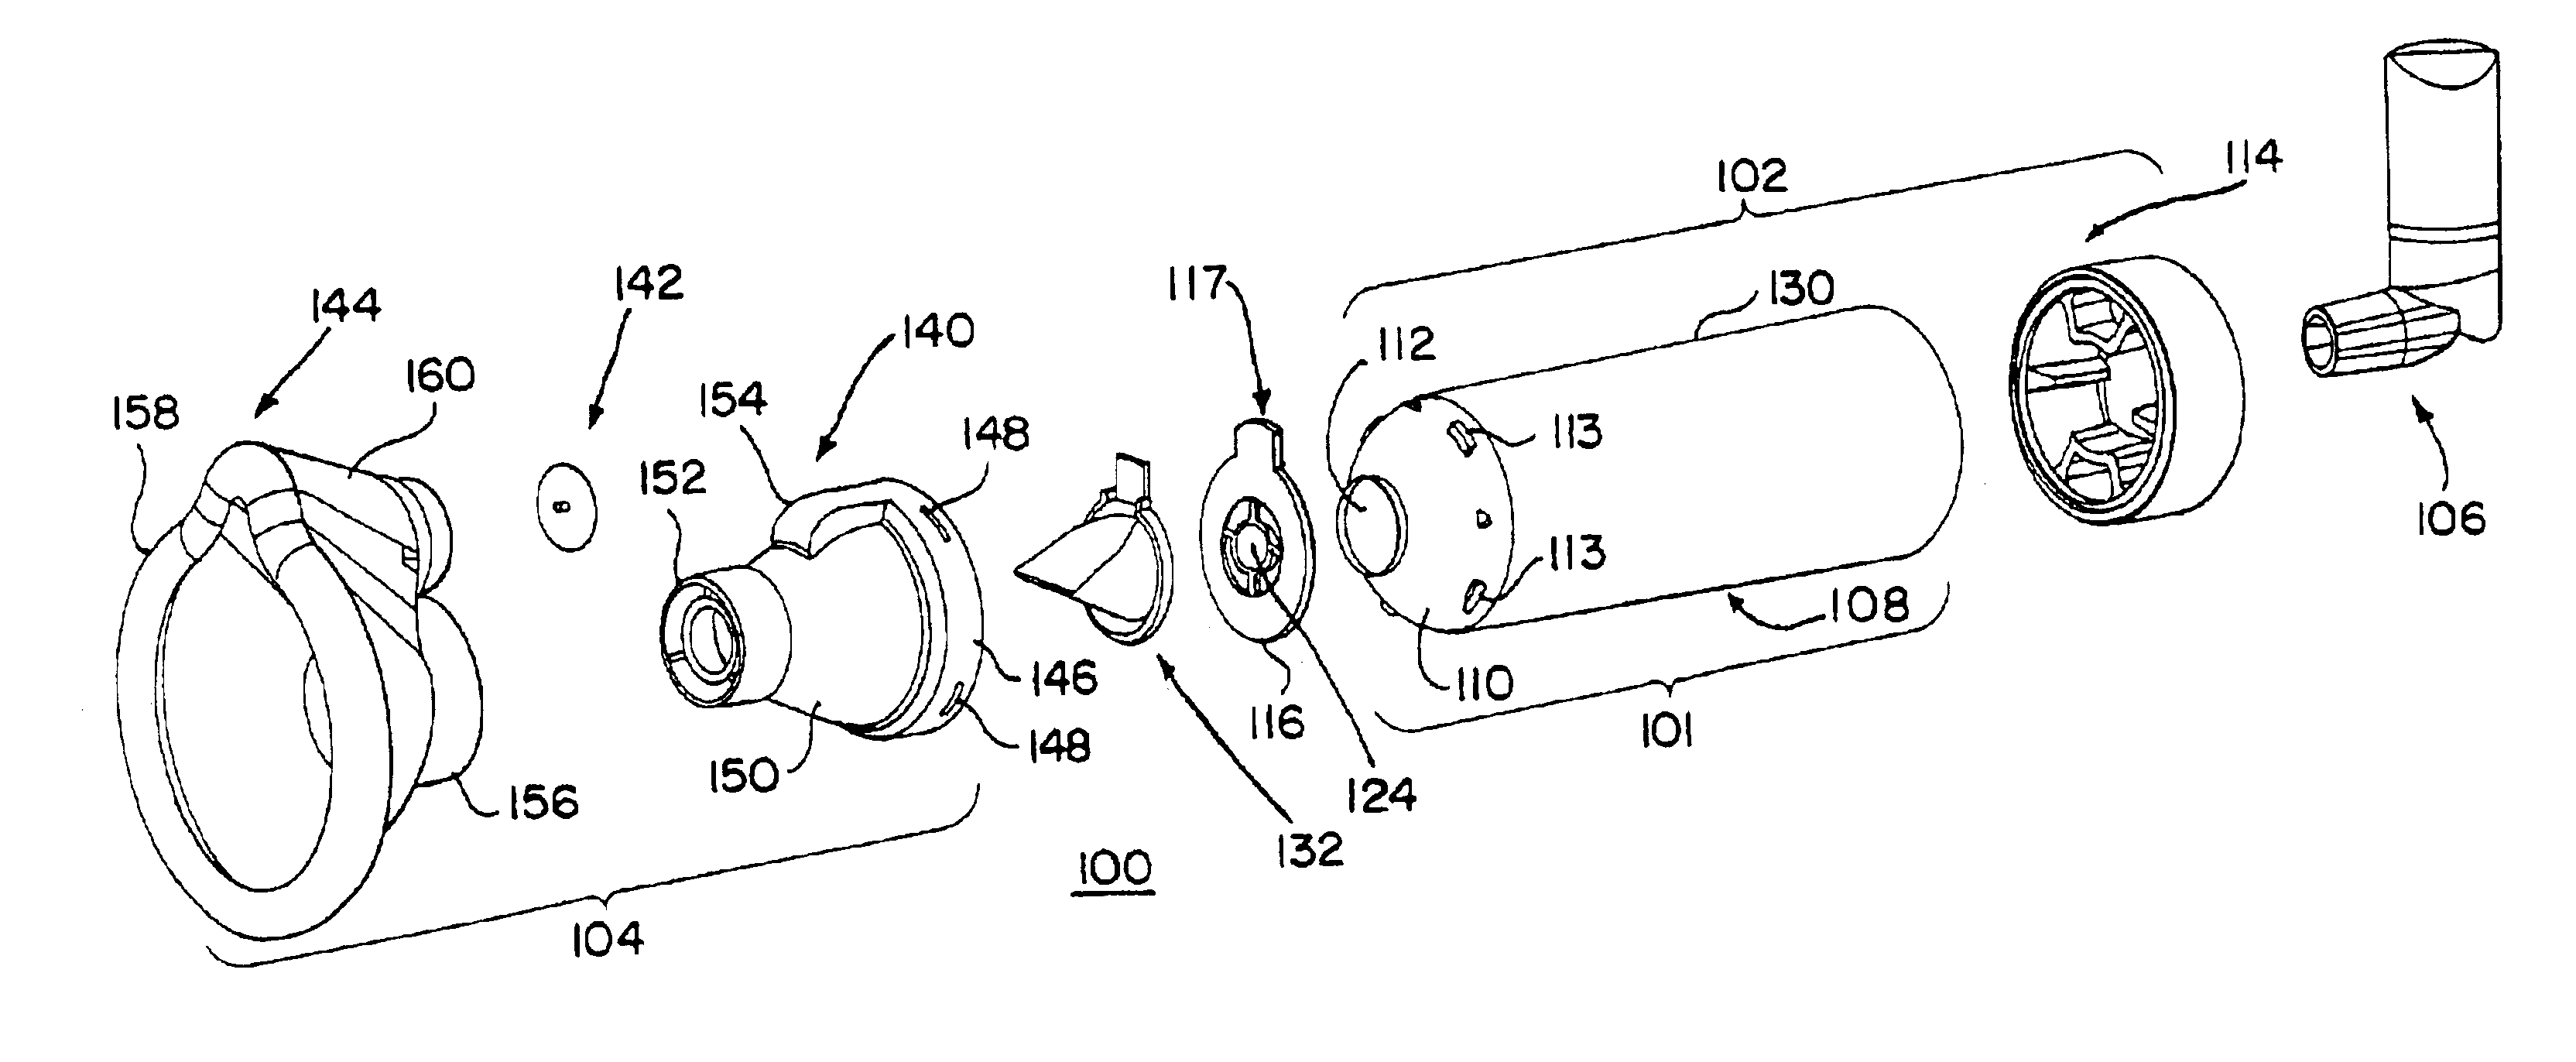 Visual indicator for an aerosol medication delivery apparatus and system